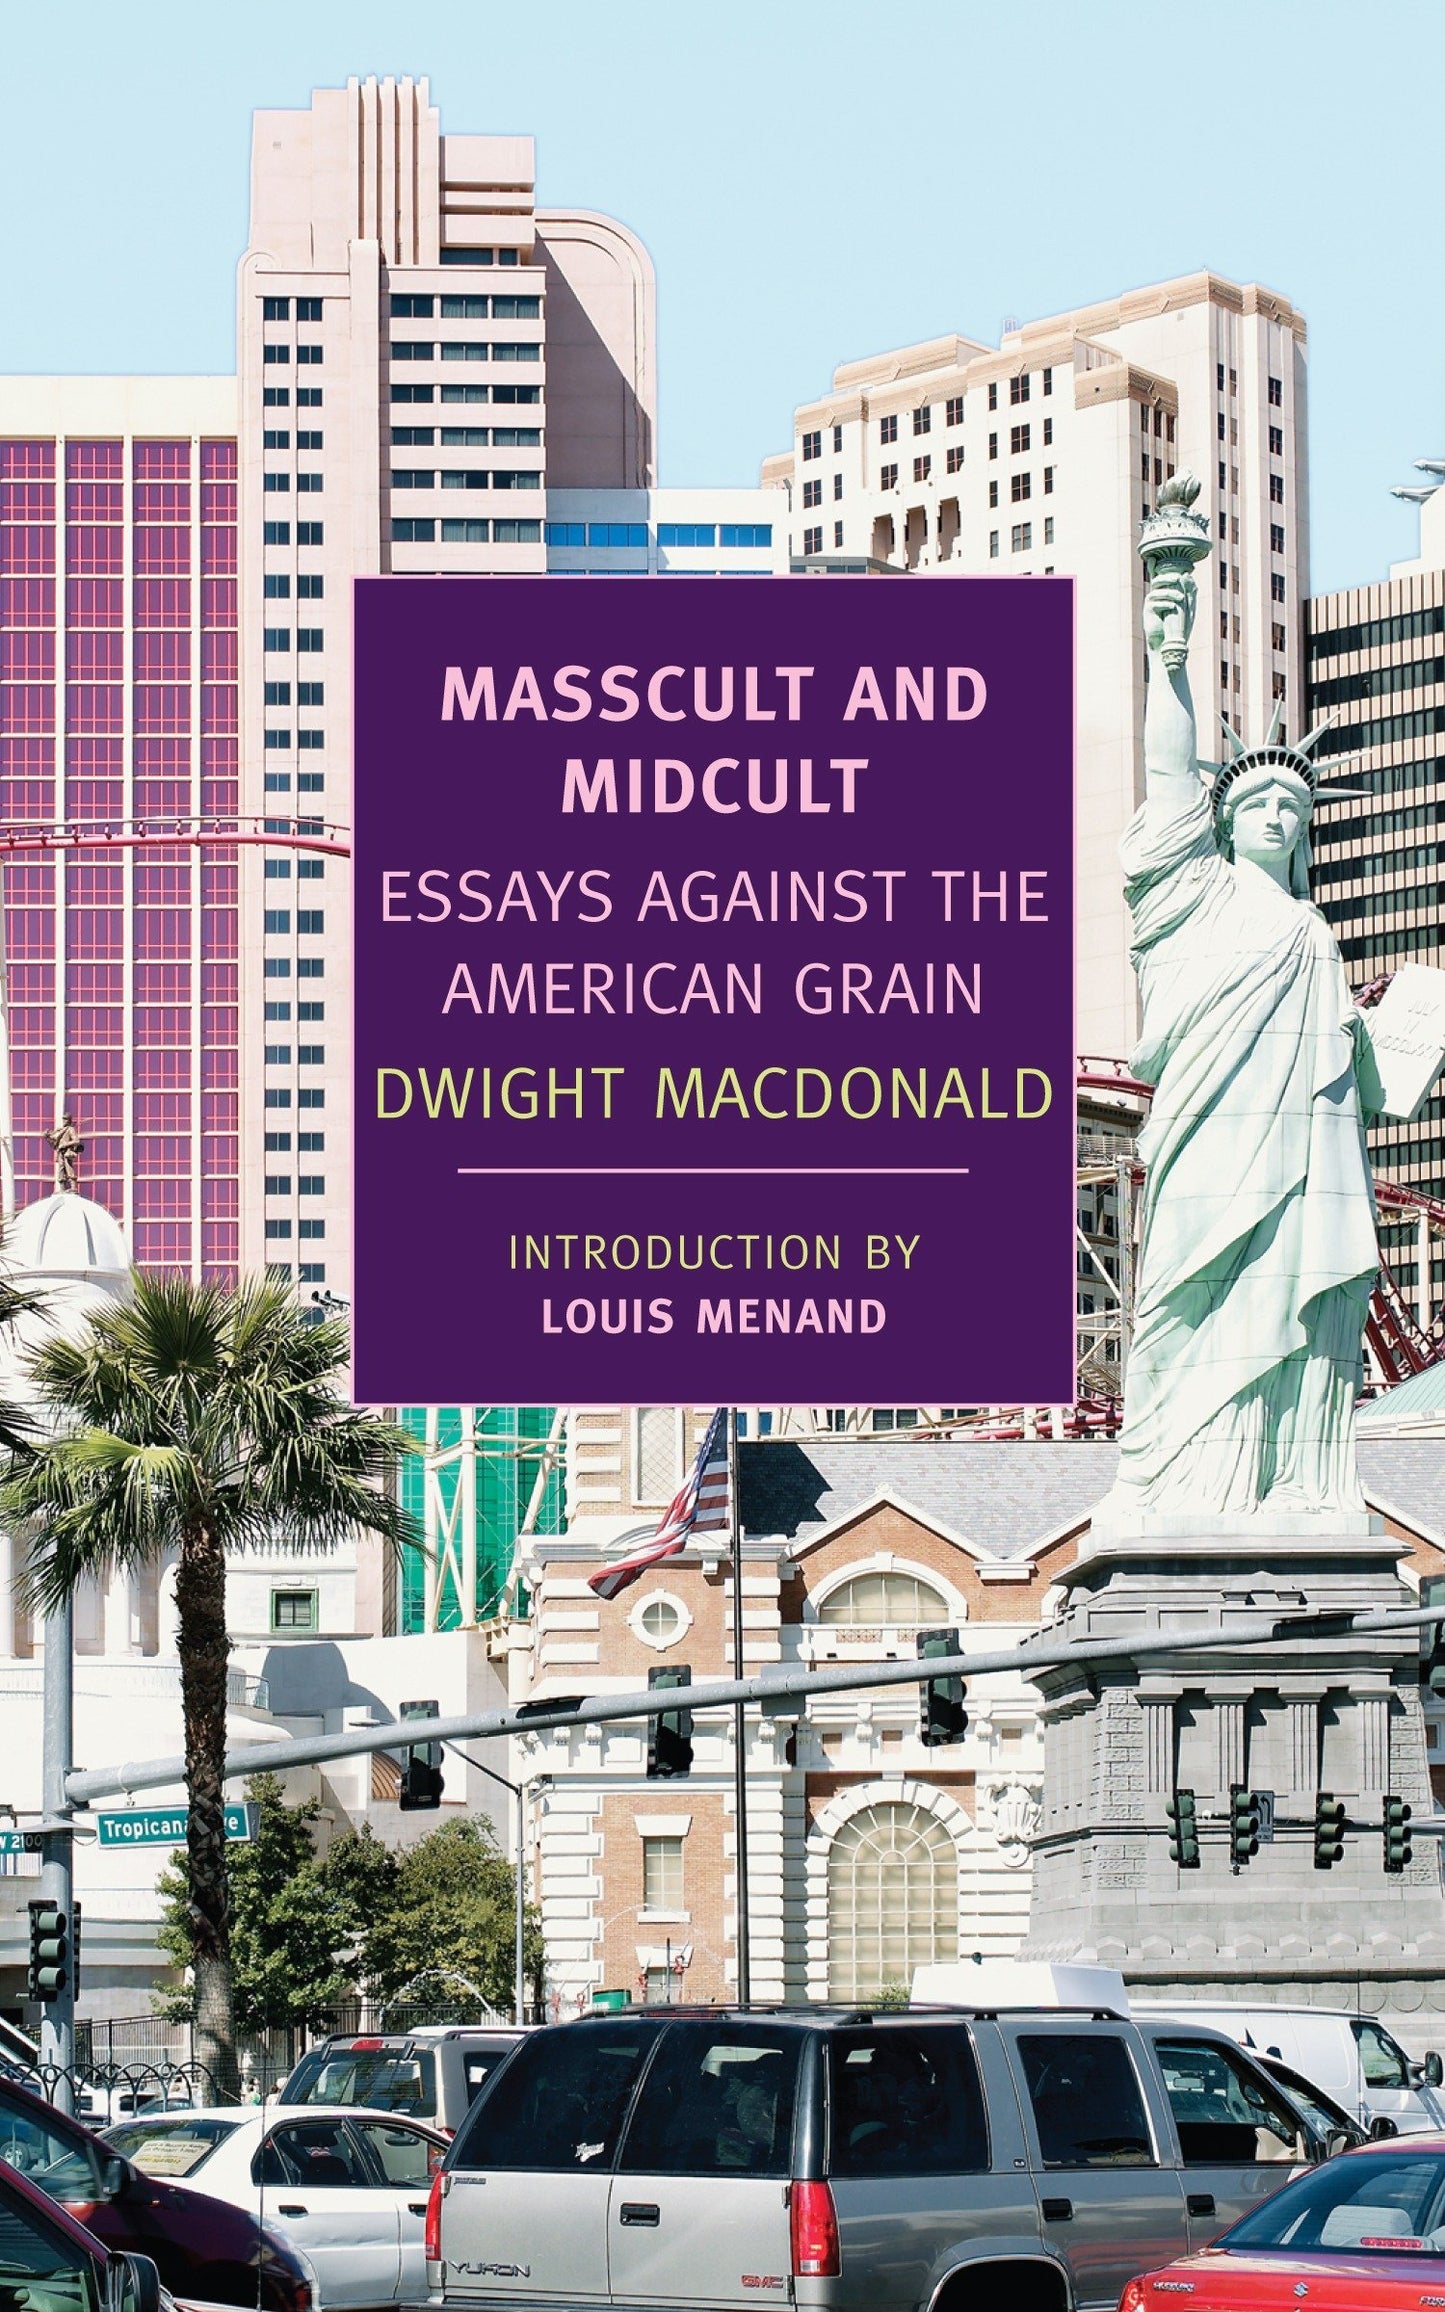 Masscult and Midcult, by Dwight MacDonald